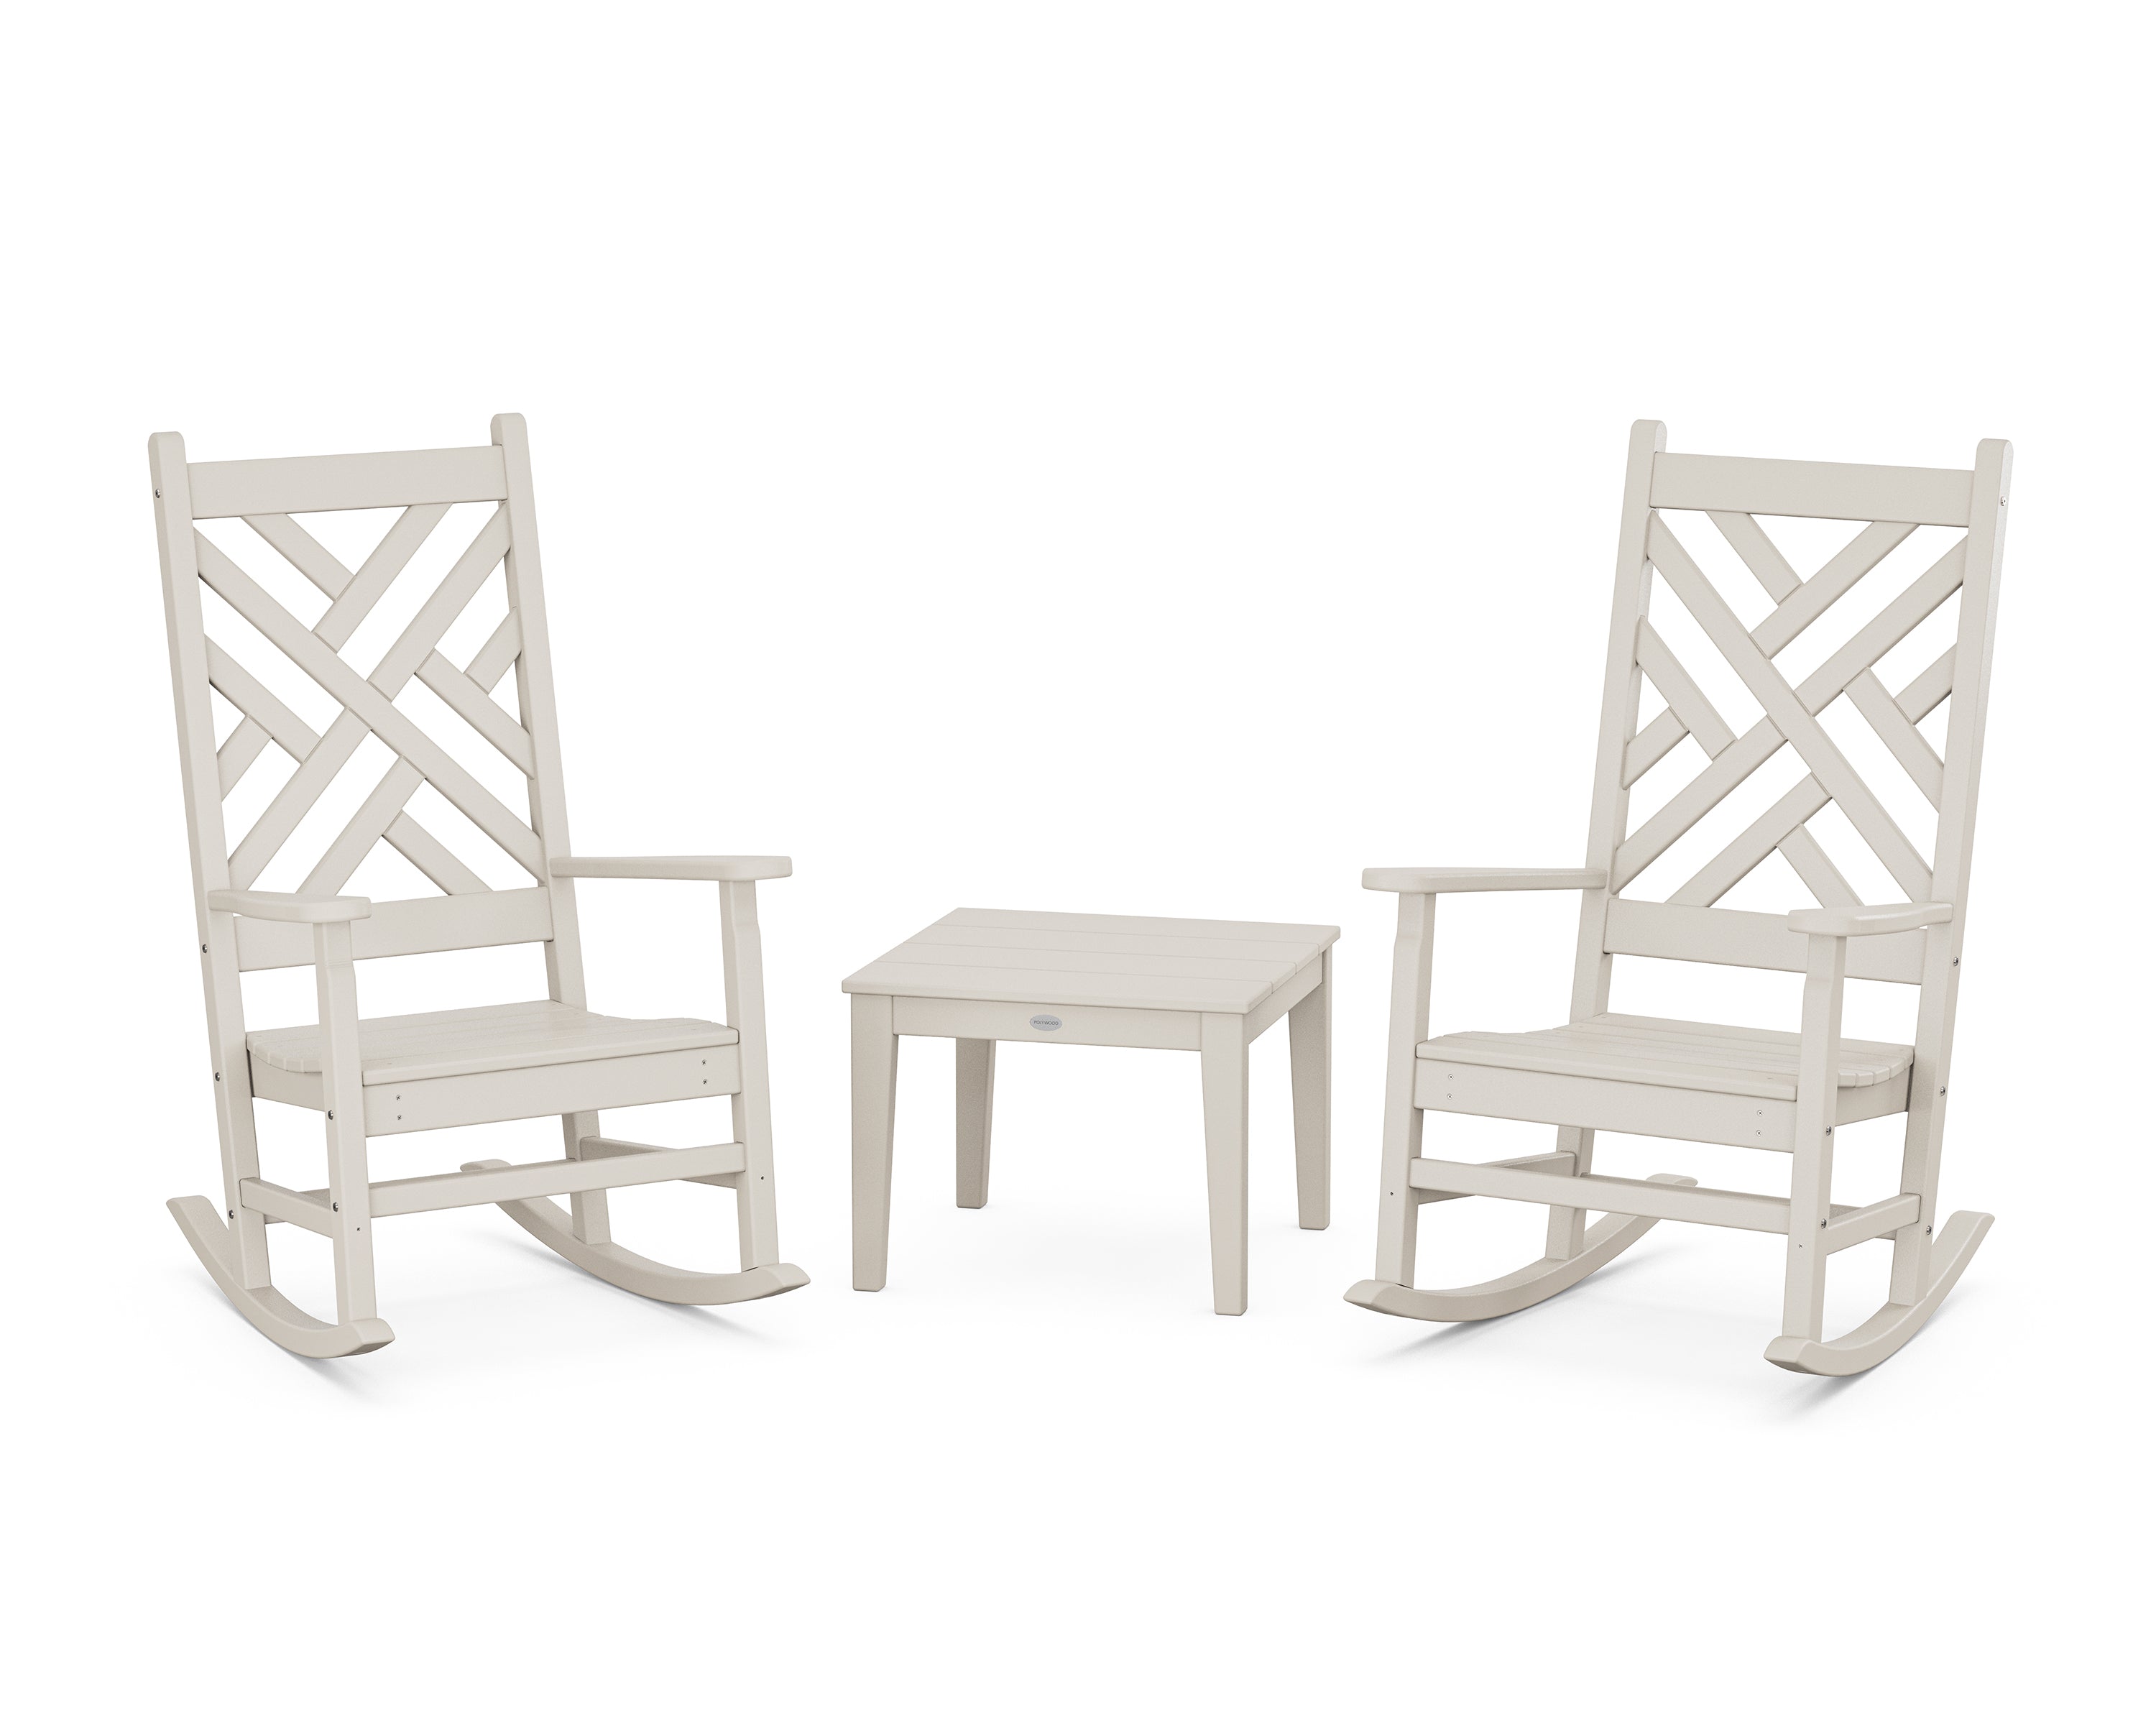 POLYWOOD® Chippendale 3-Piece Rocking Chair Set in Sand